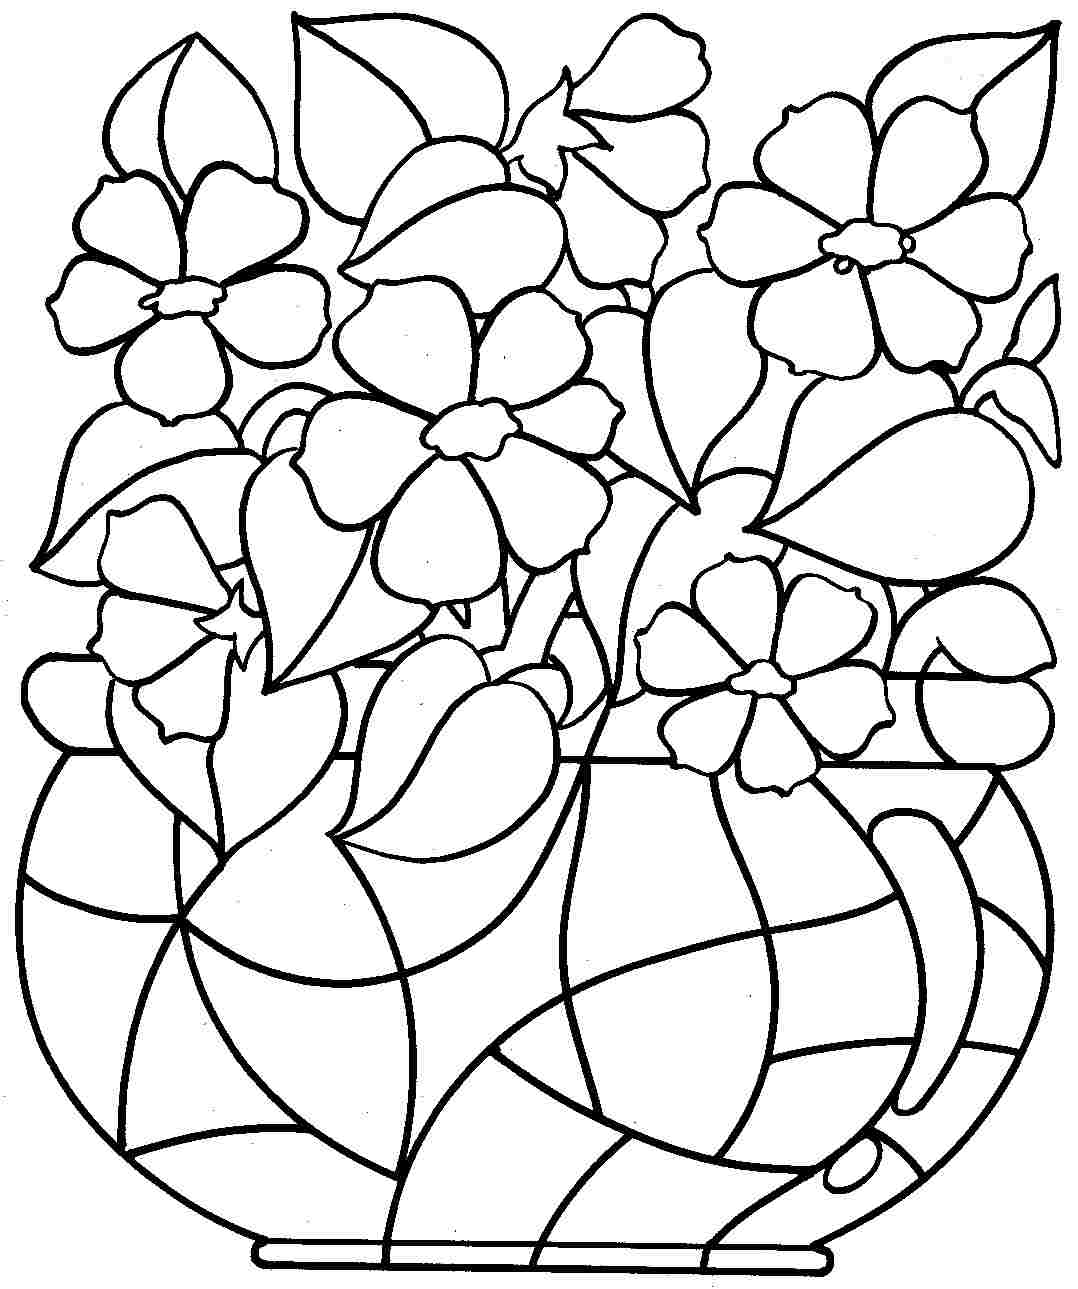 Free Printable Spring Coloring Pages For Adults - Coloring ...